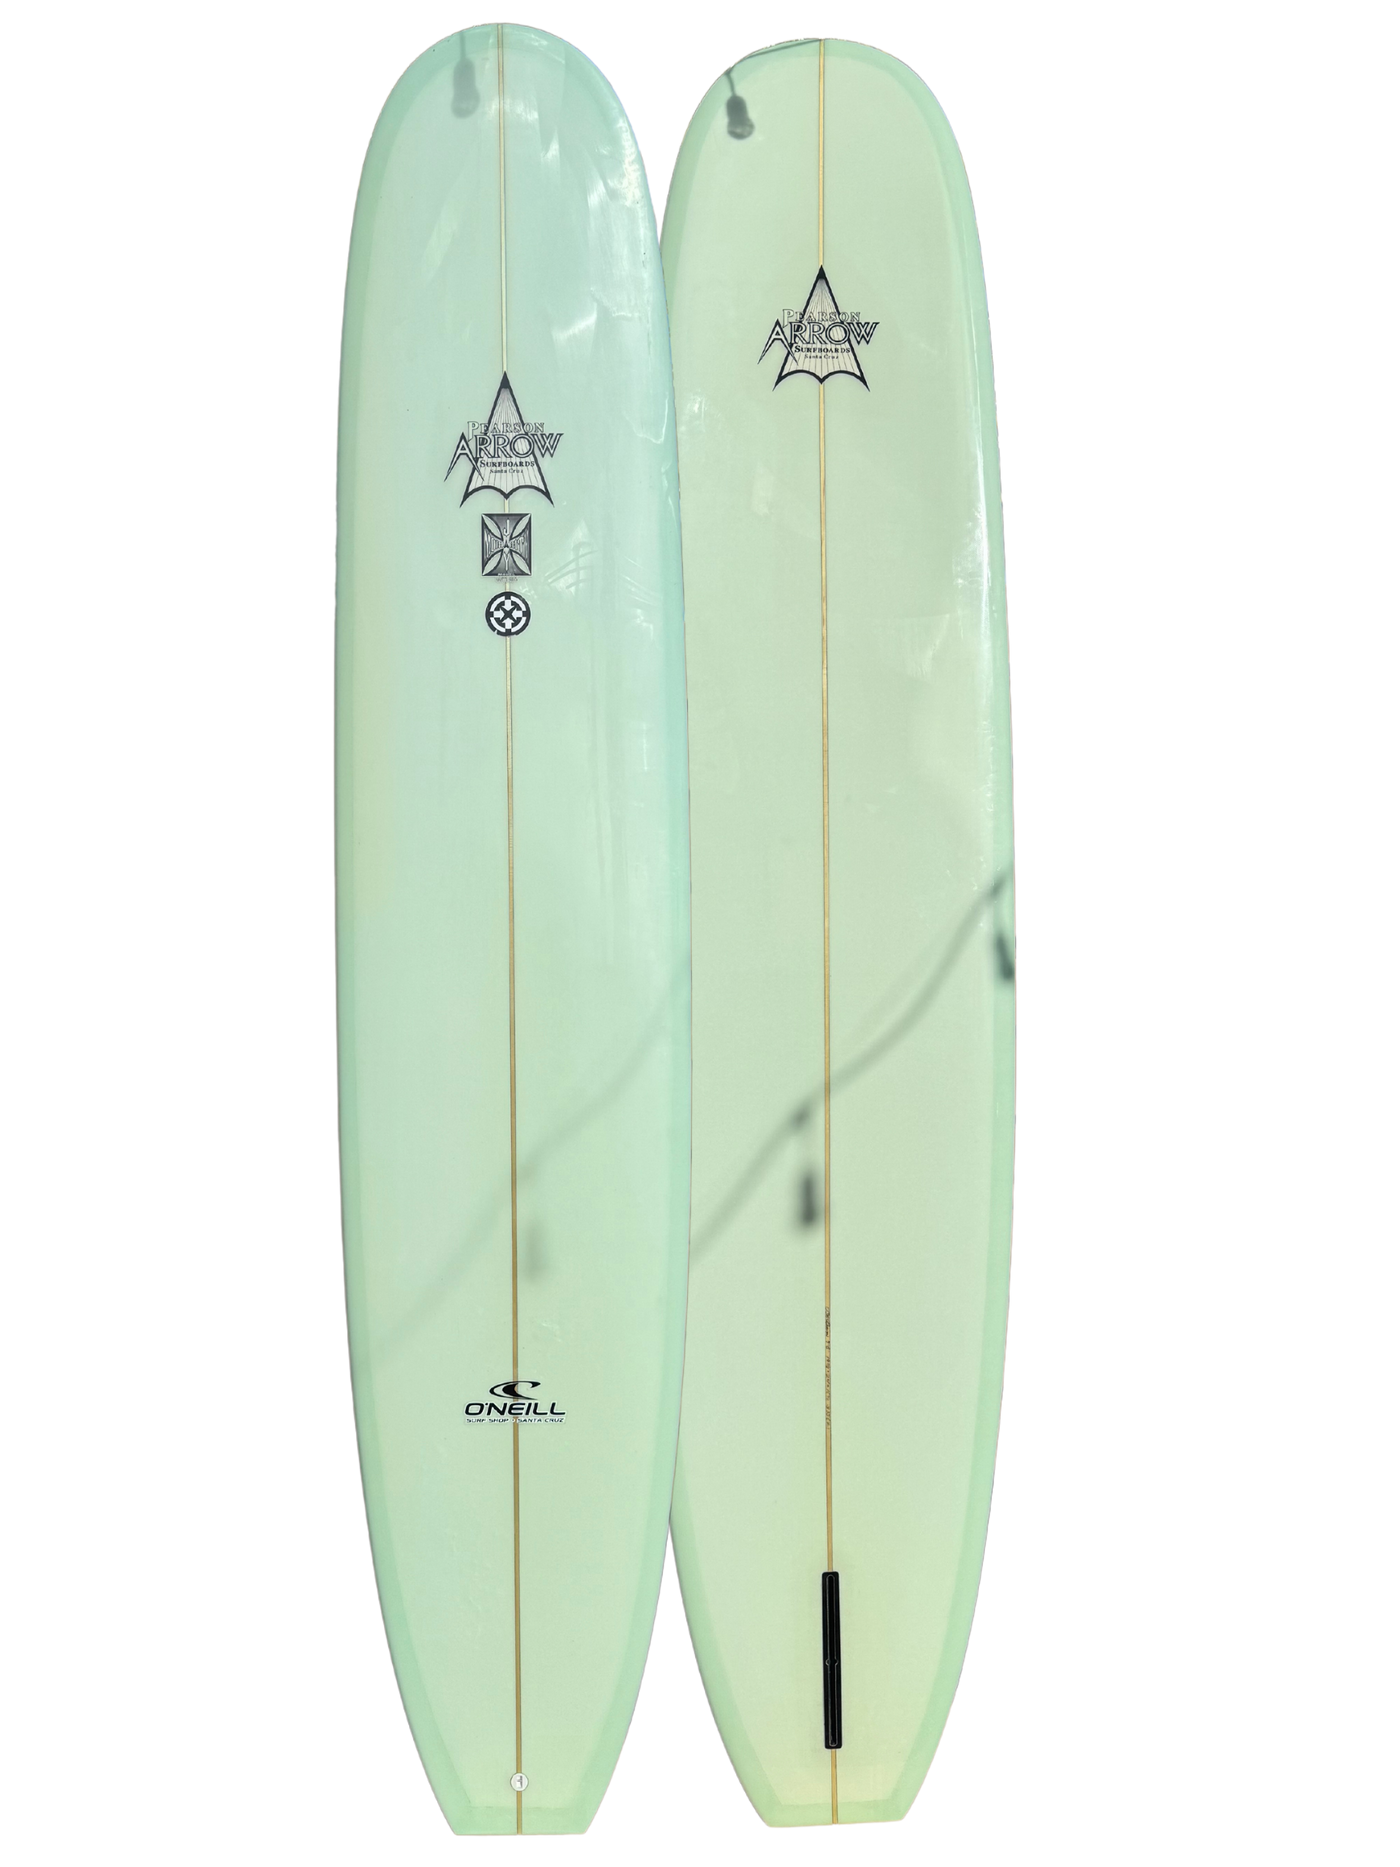 USED 9'8 Pearson Noserider